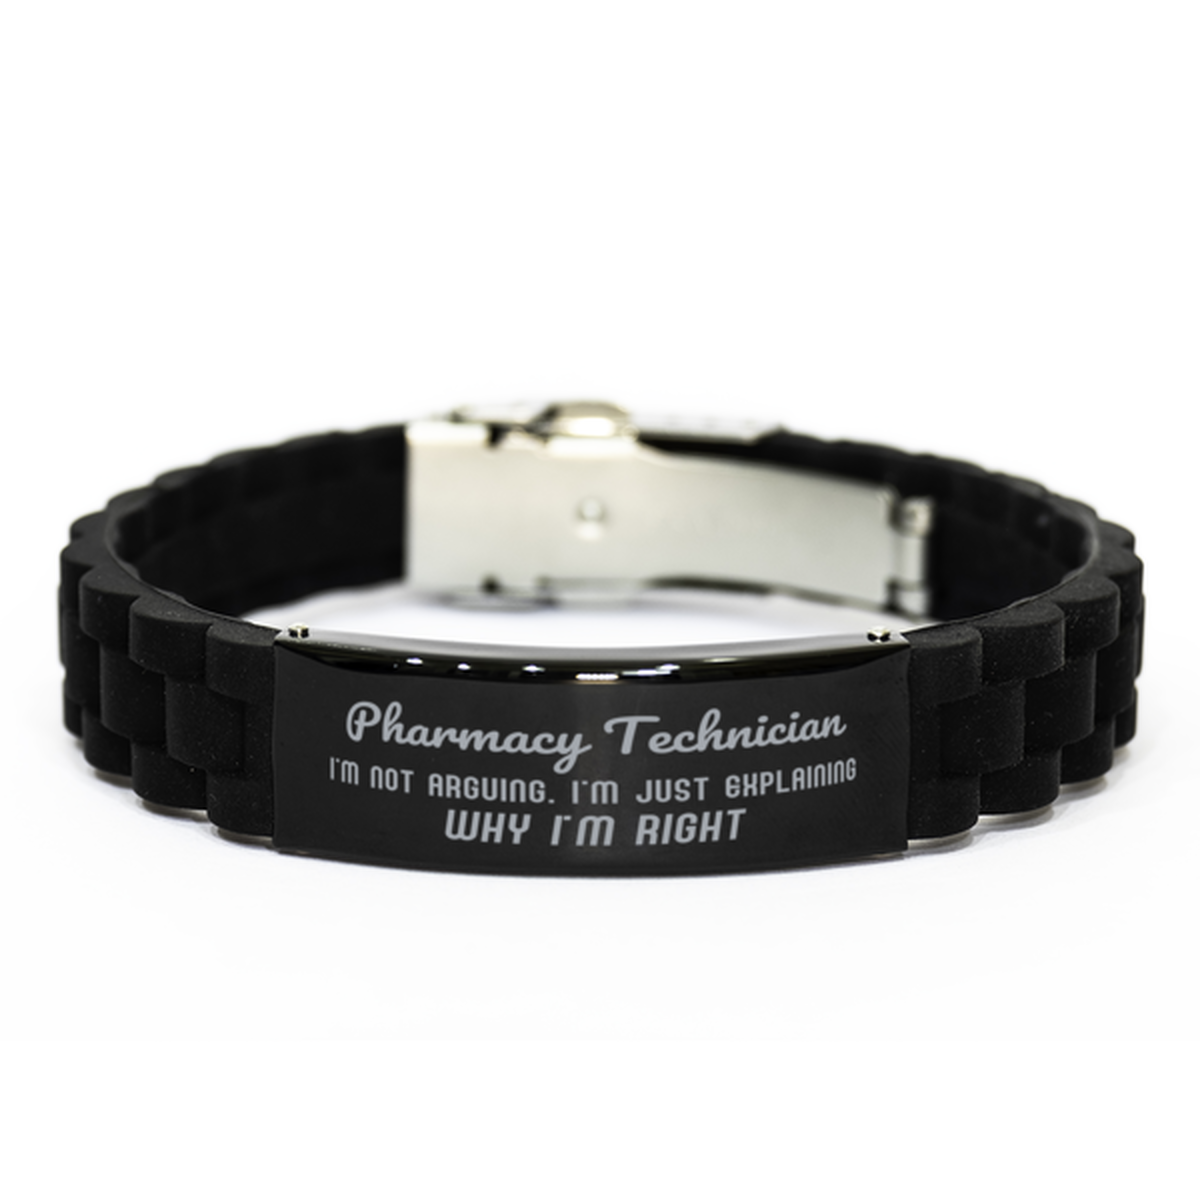 Pharmacy Technician I'm not Arguing. I'm Just Explaining Why I'm RIGHT Black Glidelock Clasp Bracelet, Funny Saying Quote Pharmacy Technician Gifts For Pharmacy Technician Graduation Birthday Christmas Gifts for Men Women Coworker